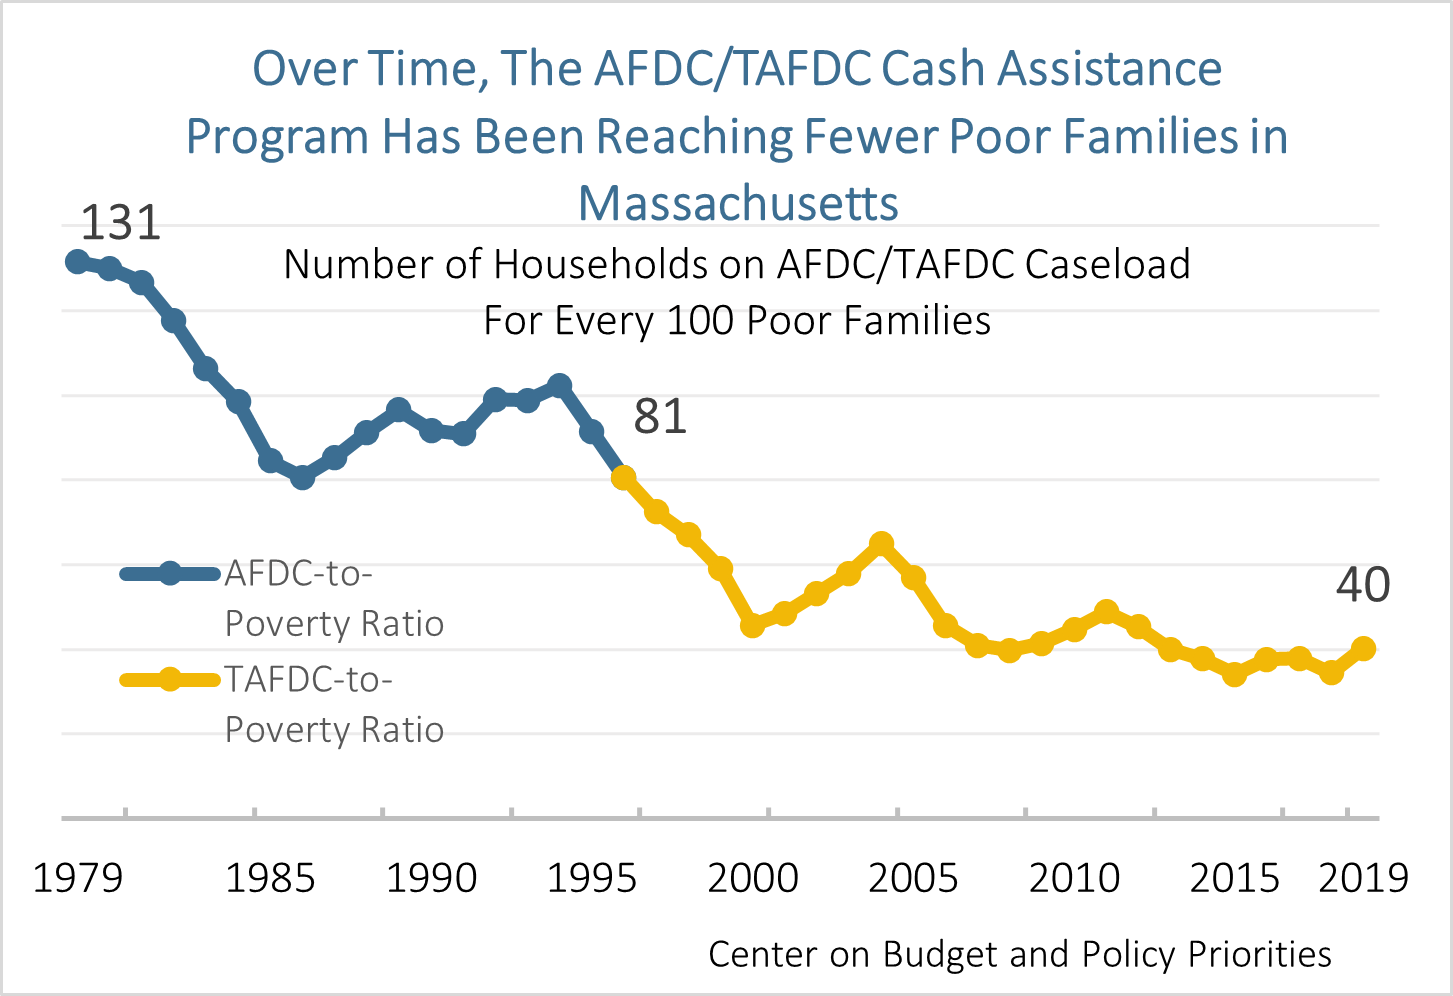 Chart: Over Time, The AFDC/TAFDC Cash Assistance Program Has Been Reaching Fewer Poor Families in Massachusetts